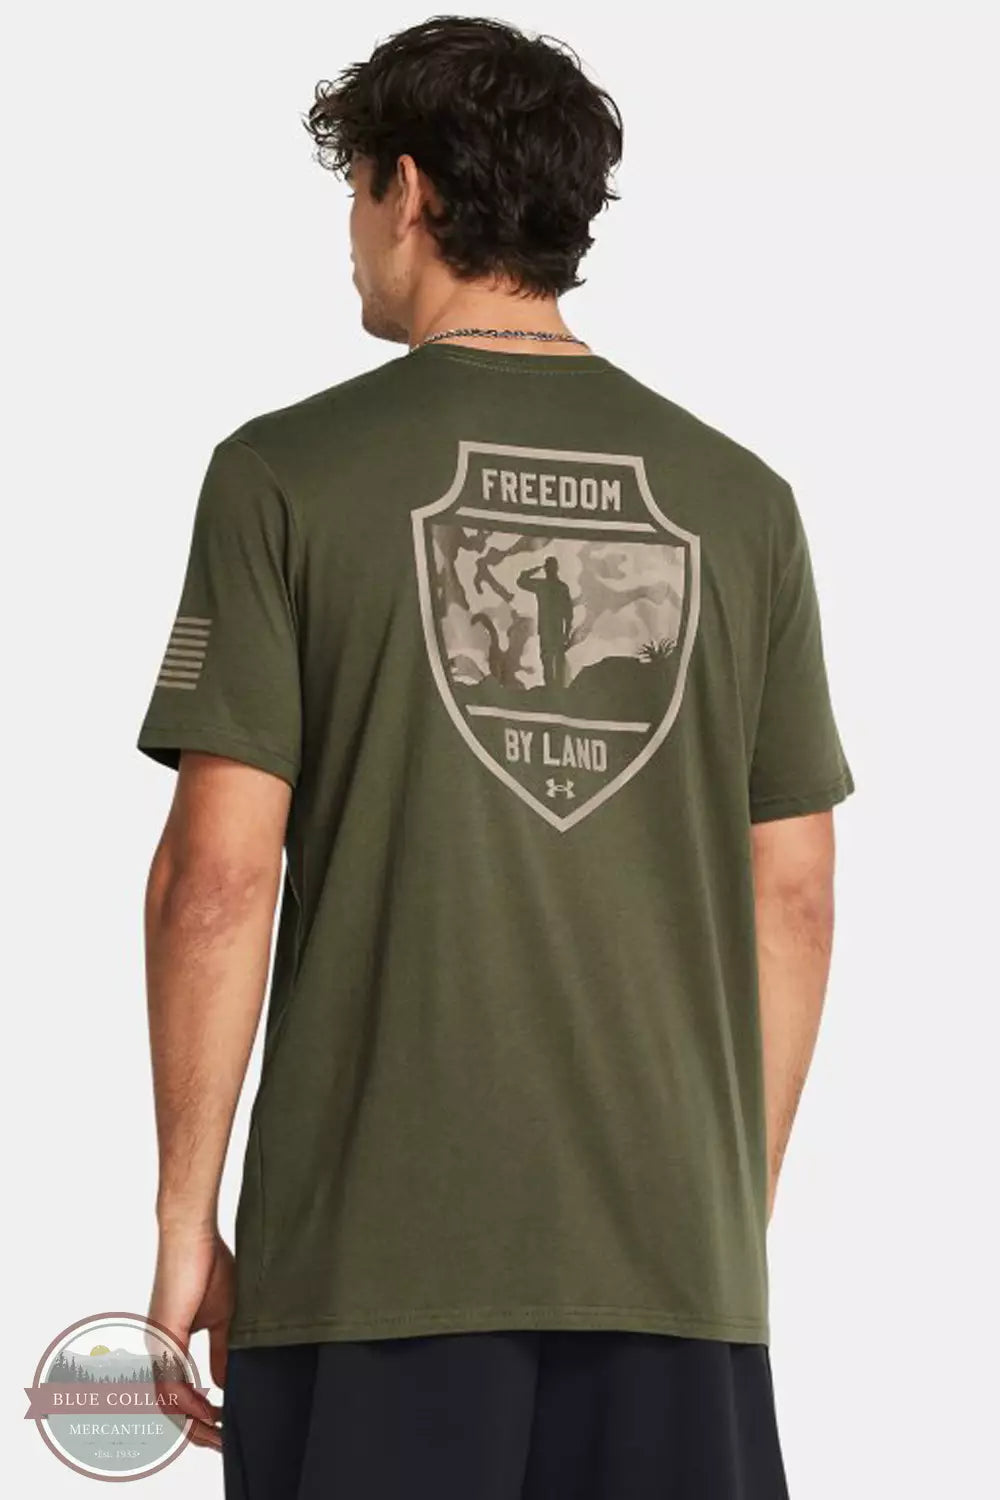 Under Armour 1385949-390 Freedom By Land Short Sleeve T-Shirt in Marine Green Back View